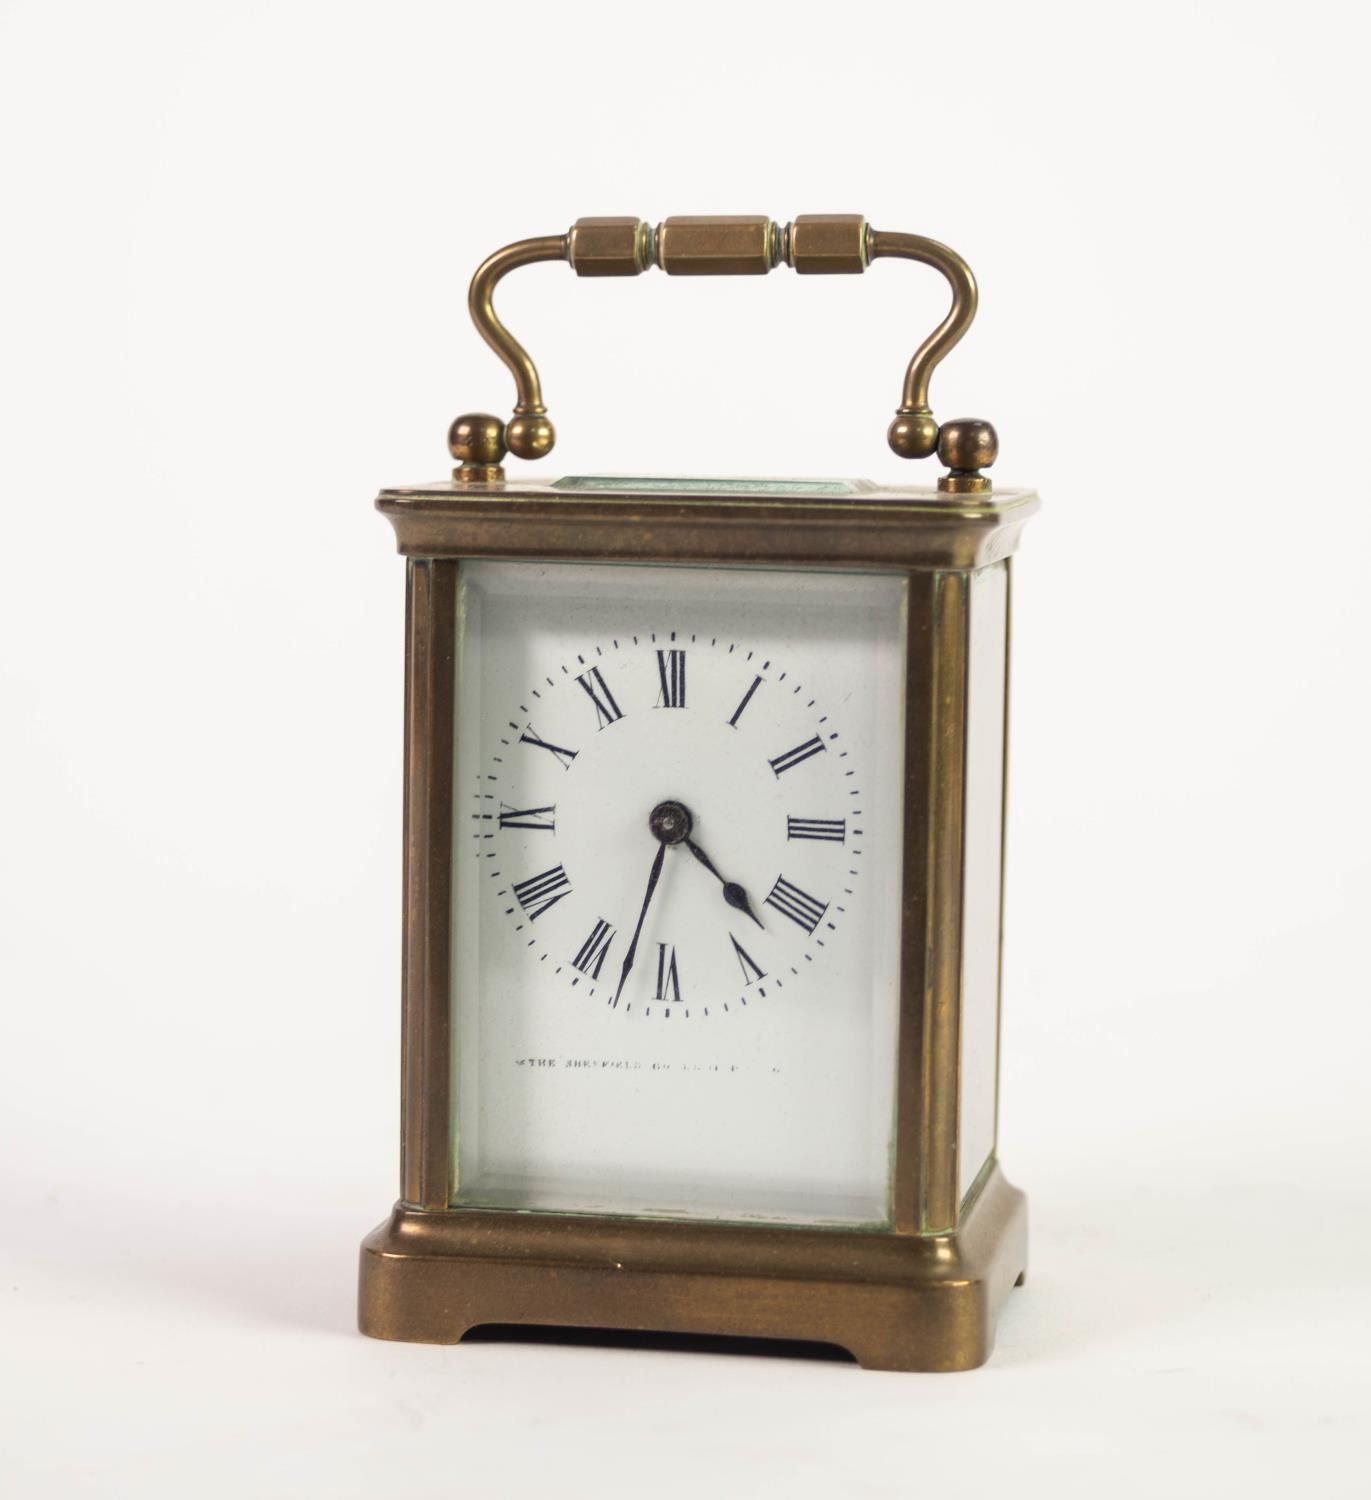 EARLY 20th CENTURY BRASS TIME PIECE CARRIAGE CLOCK with black and white roman dial, folding - Image 2 of 6